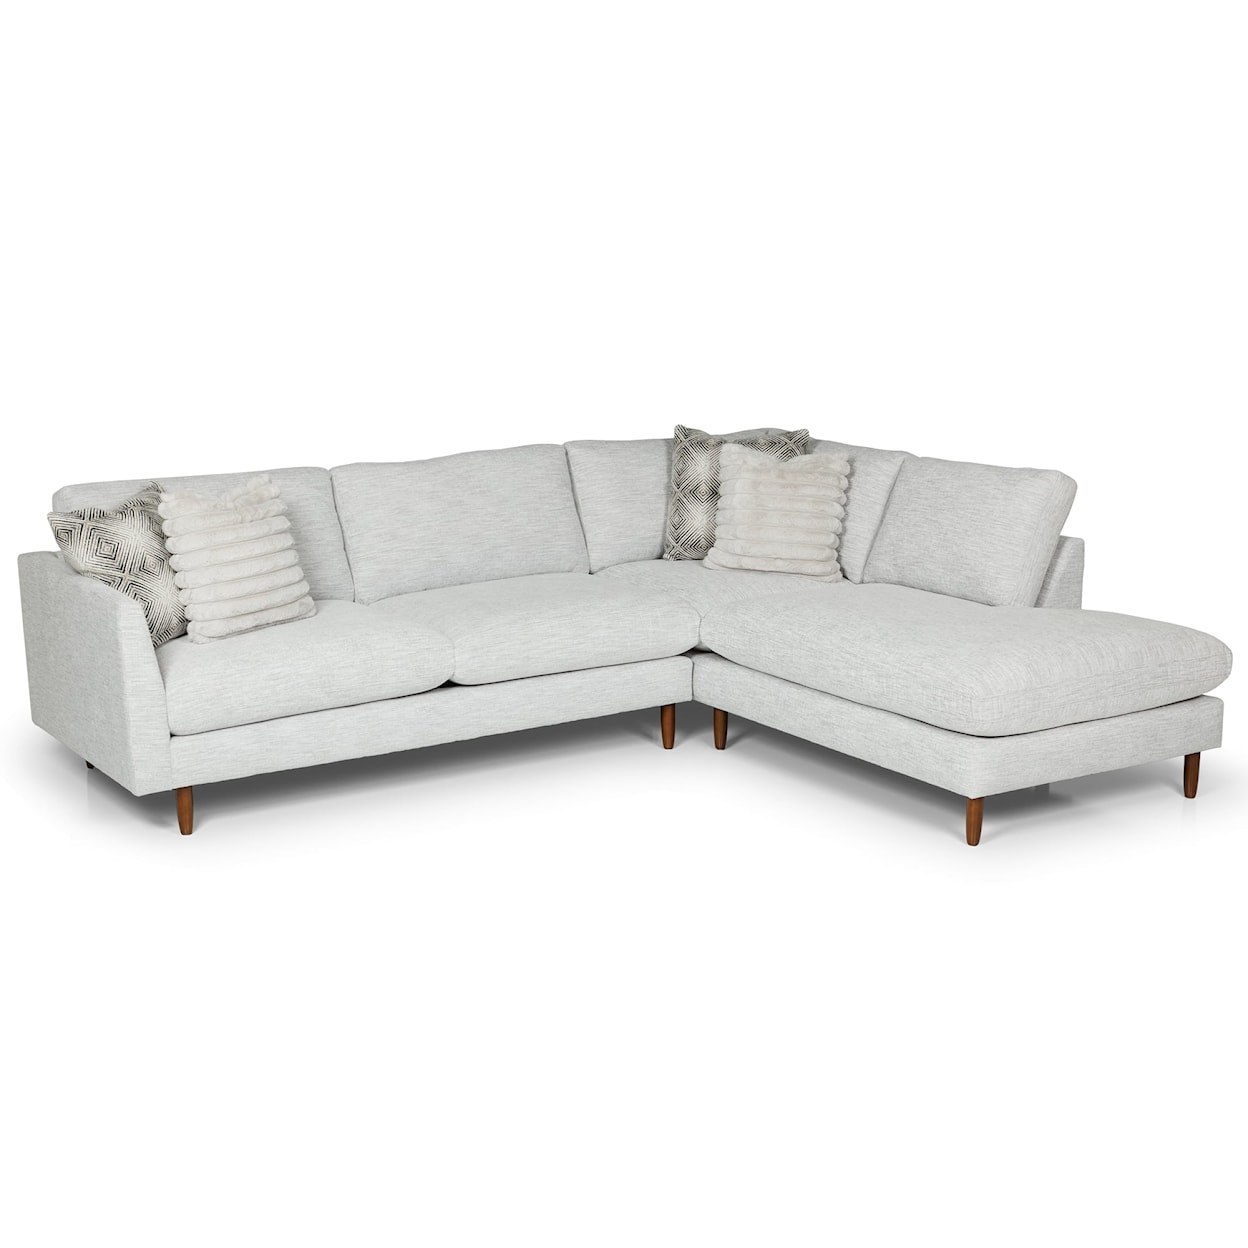 Sunset Home Stanton 2 Piece Sectional